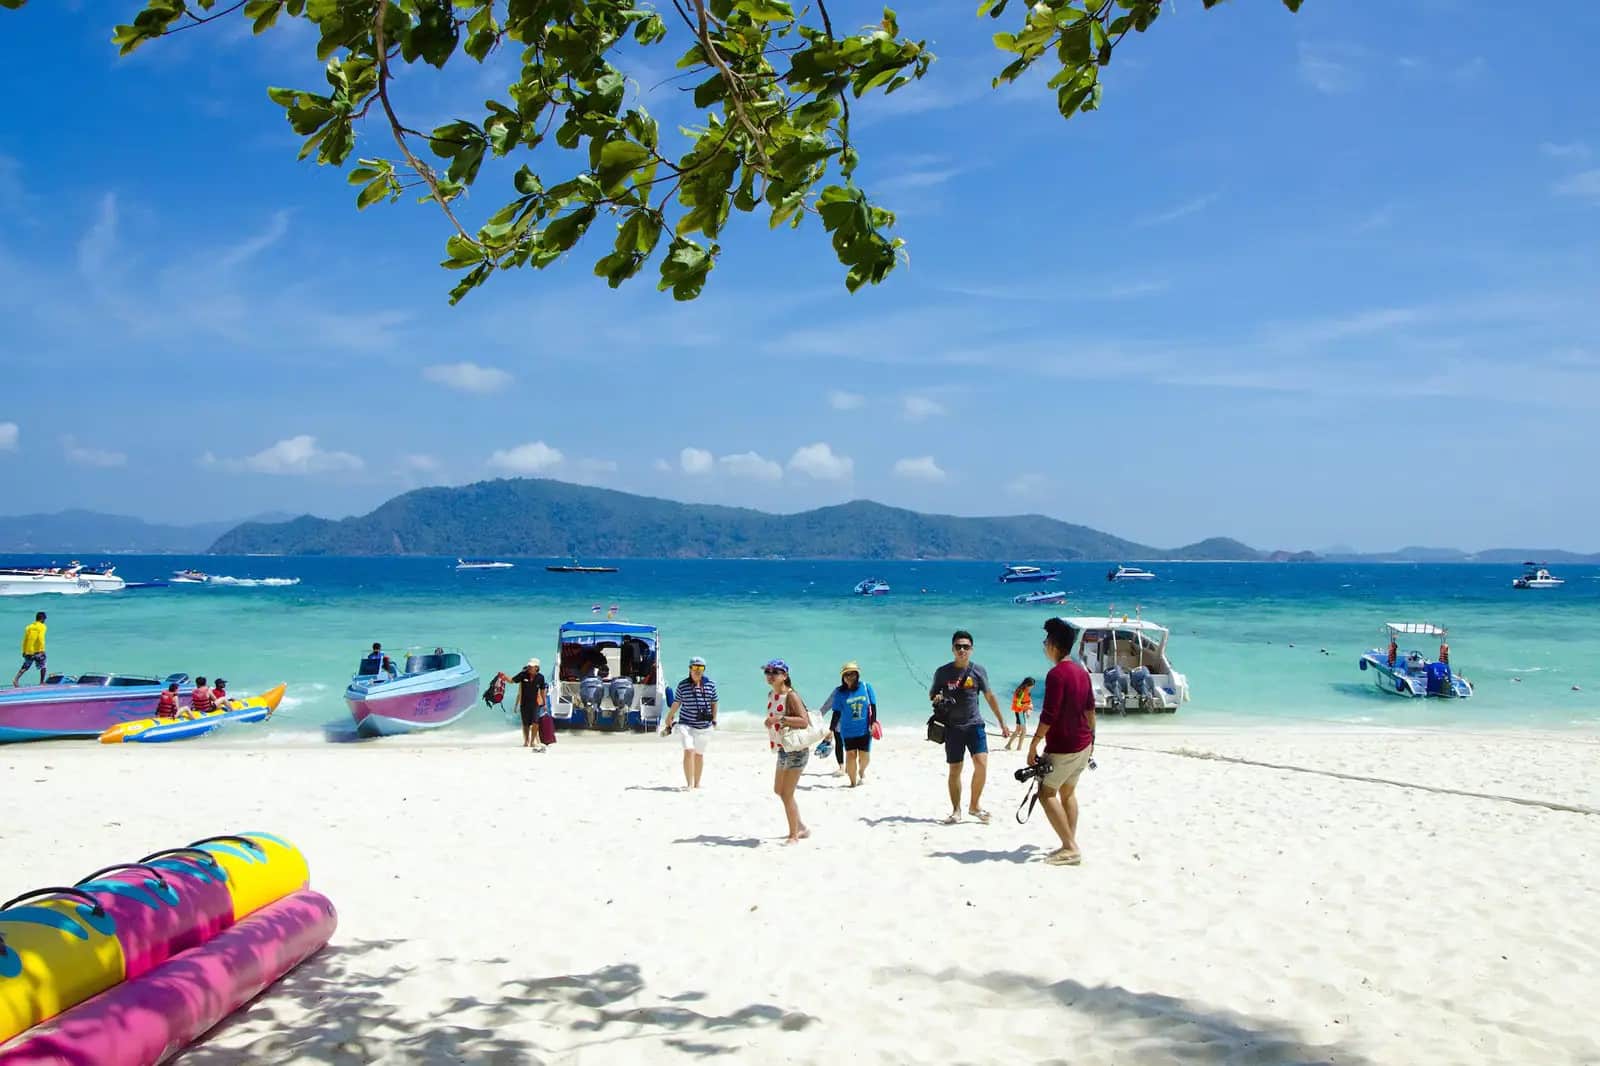 The Coral Island in Phuket